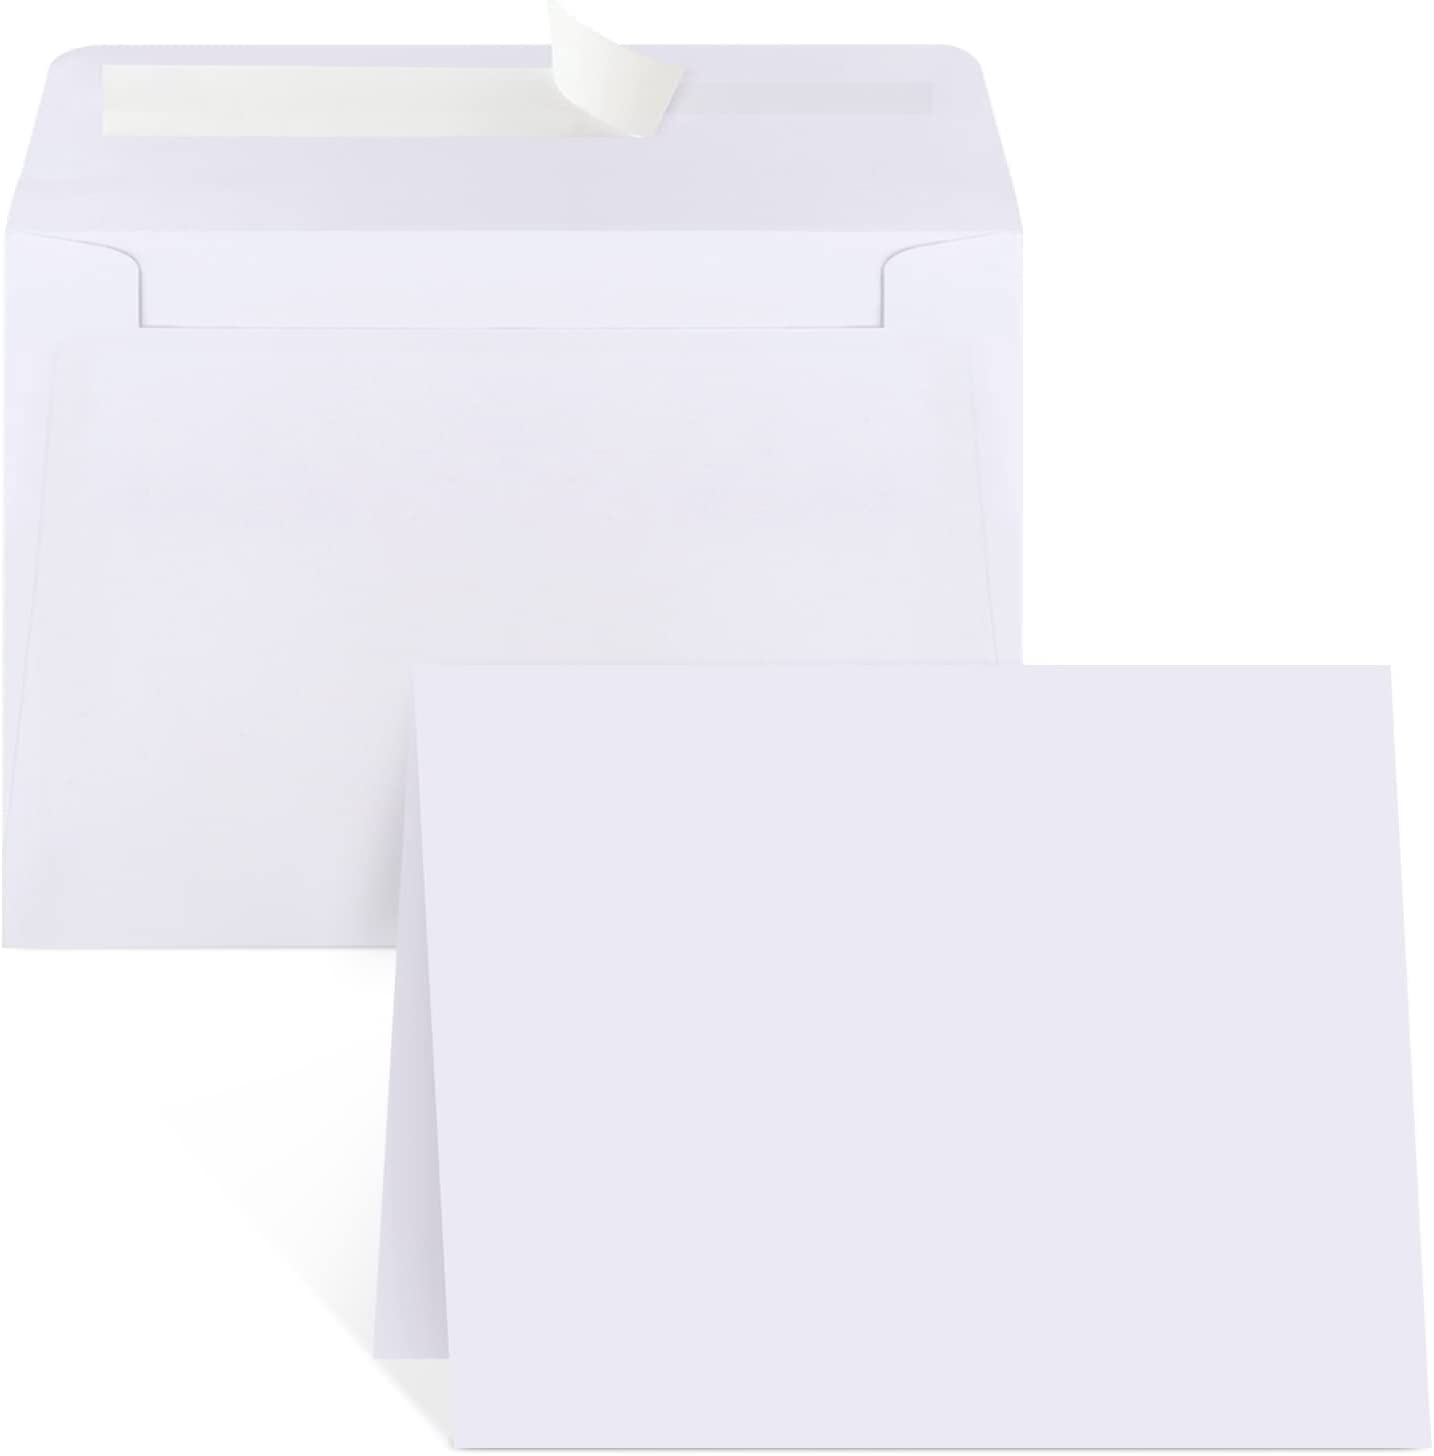 Heavyweight Blank White Glossy 4x6 Cards for Laser Printers - 40 Cards &  Envelopes - Flat (Non Folding) Cards for Invitations - Thick 80lb Gloss  Stock